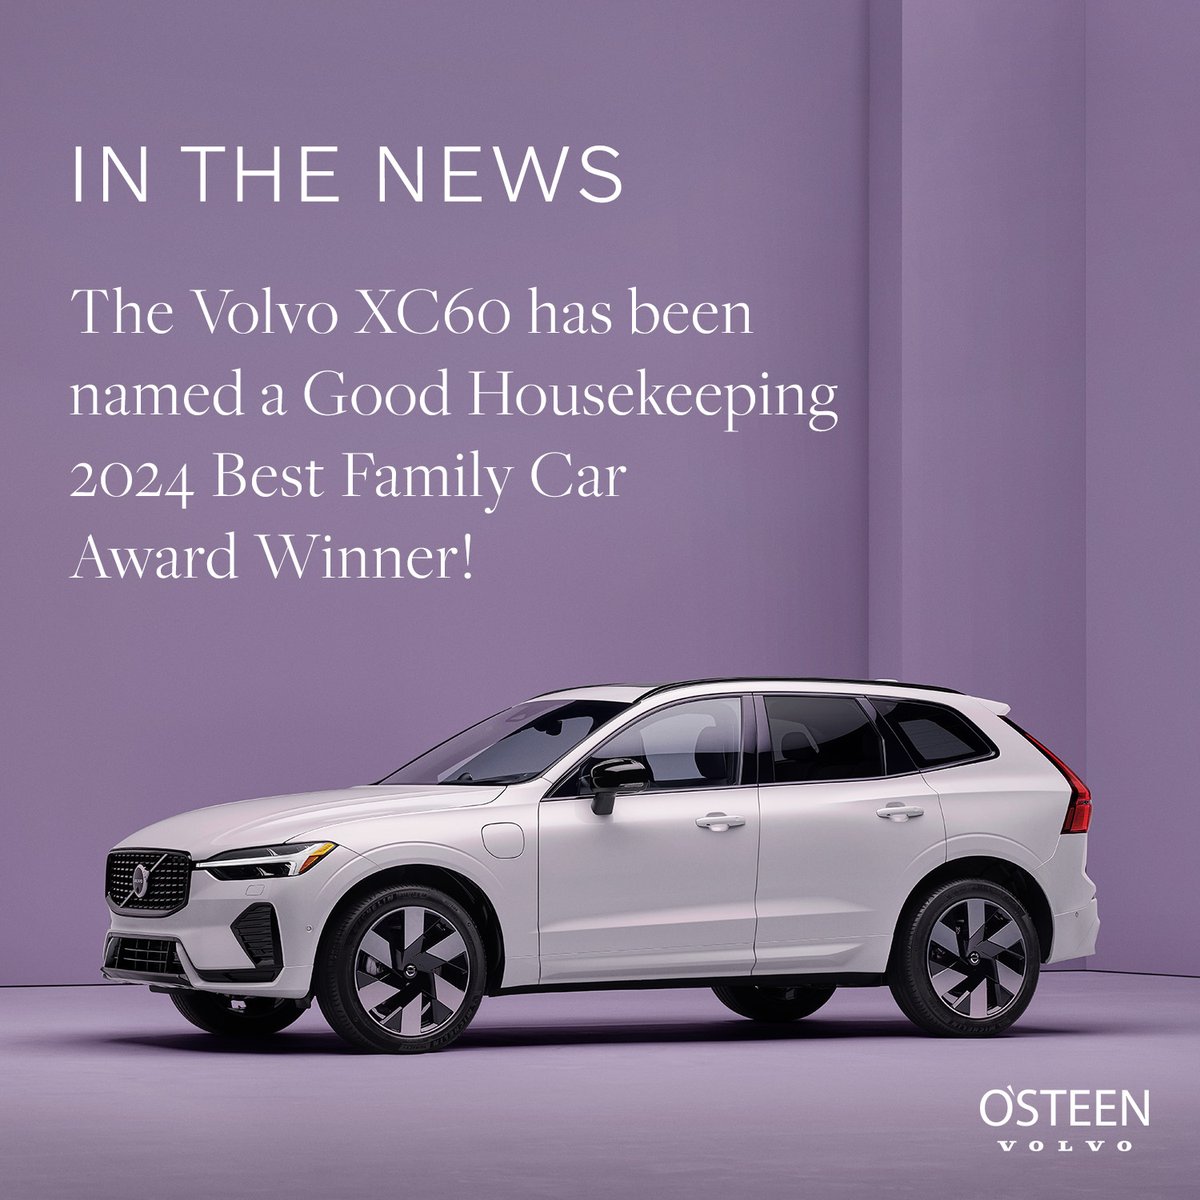 We are excited to share that the Volvo XC60 has been named a Good Housekeeping 2024 Best Family Car Award Winner! 

Read the full story: ow.ly/efnk50Rk9Tj

#VolvoOfJacksonville #VolvoSUV #BestFamilyCar #JacksonvilleFl #JaxFL #FamilyCar